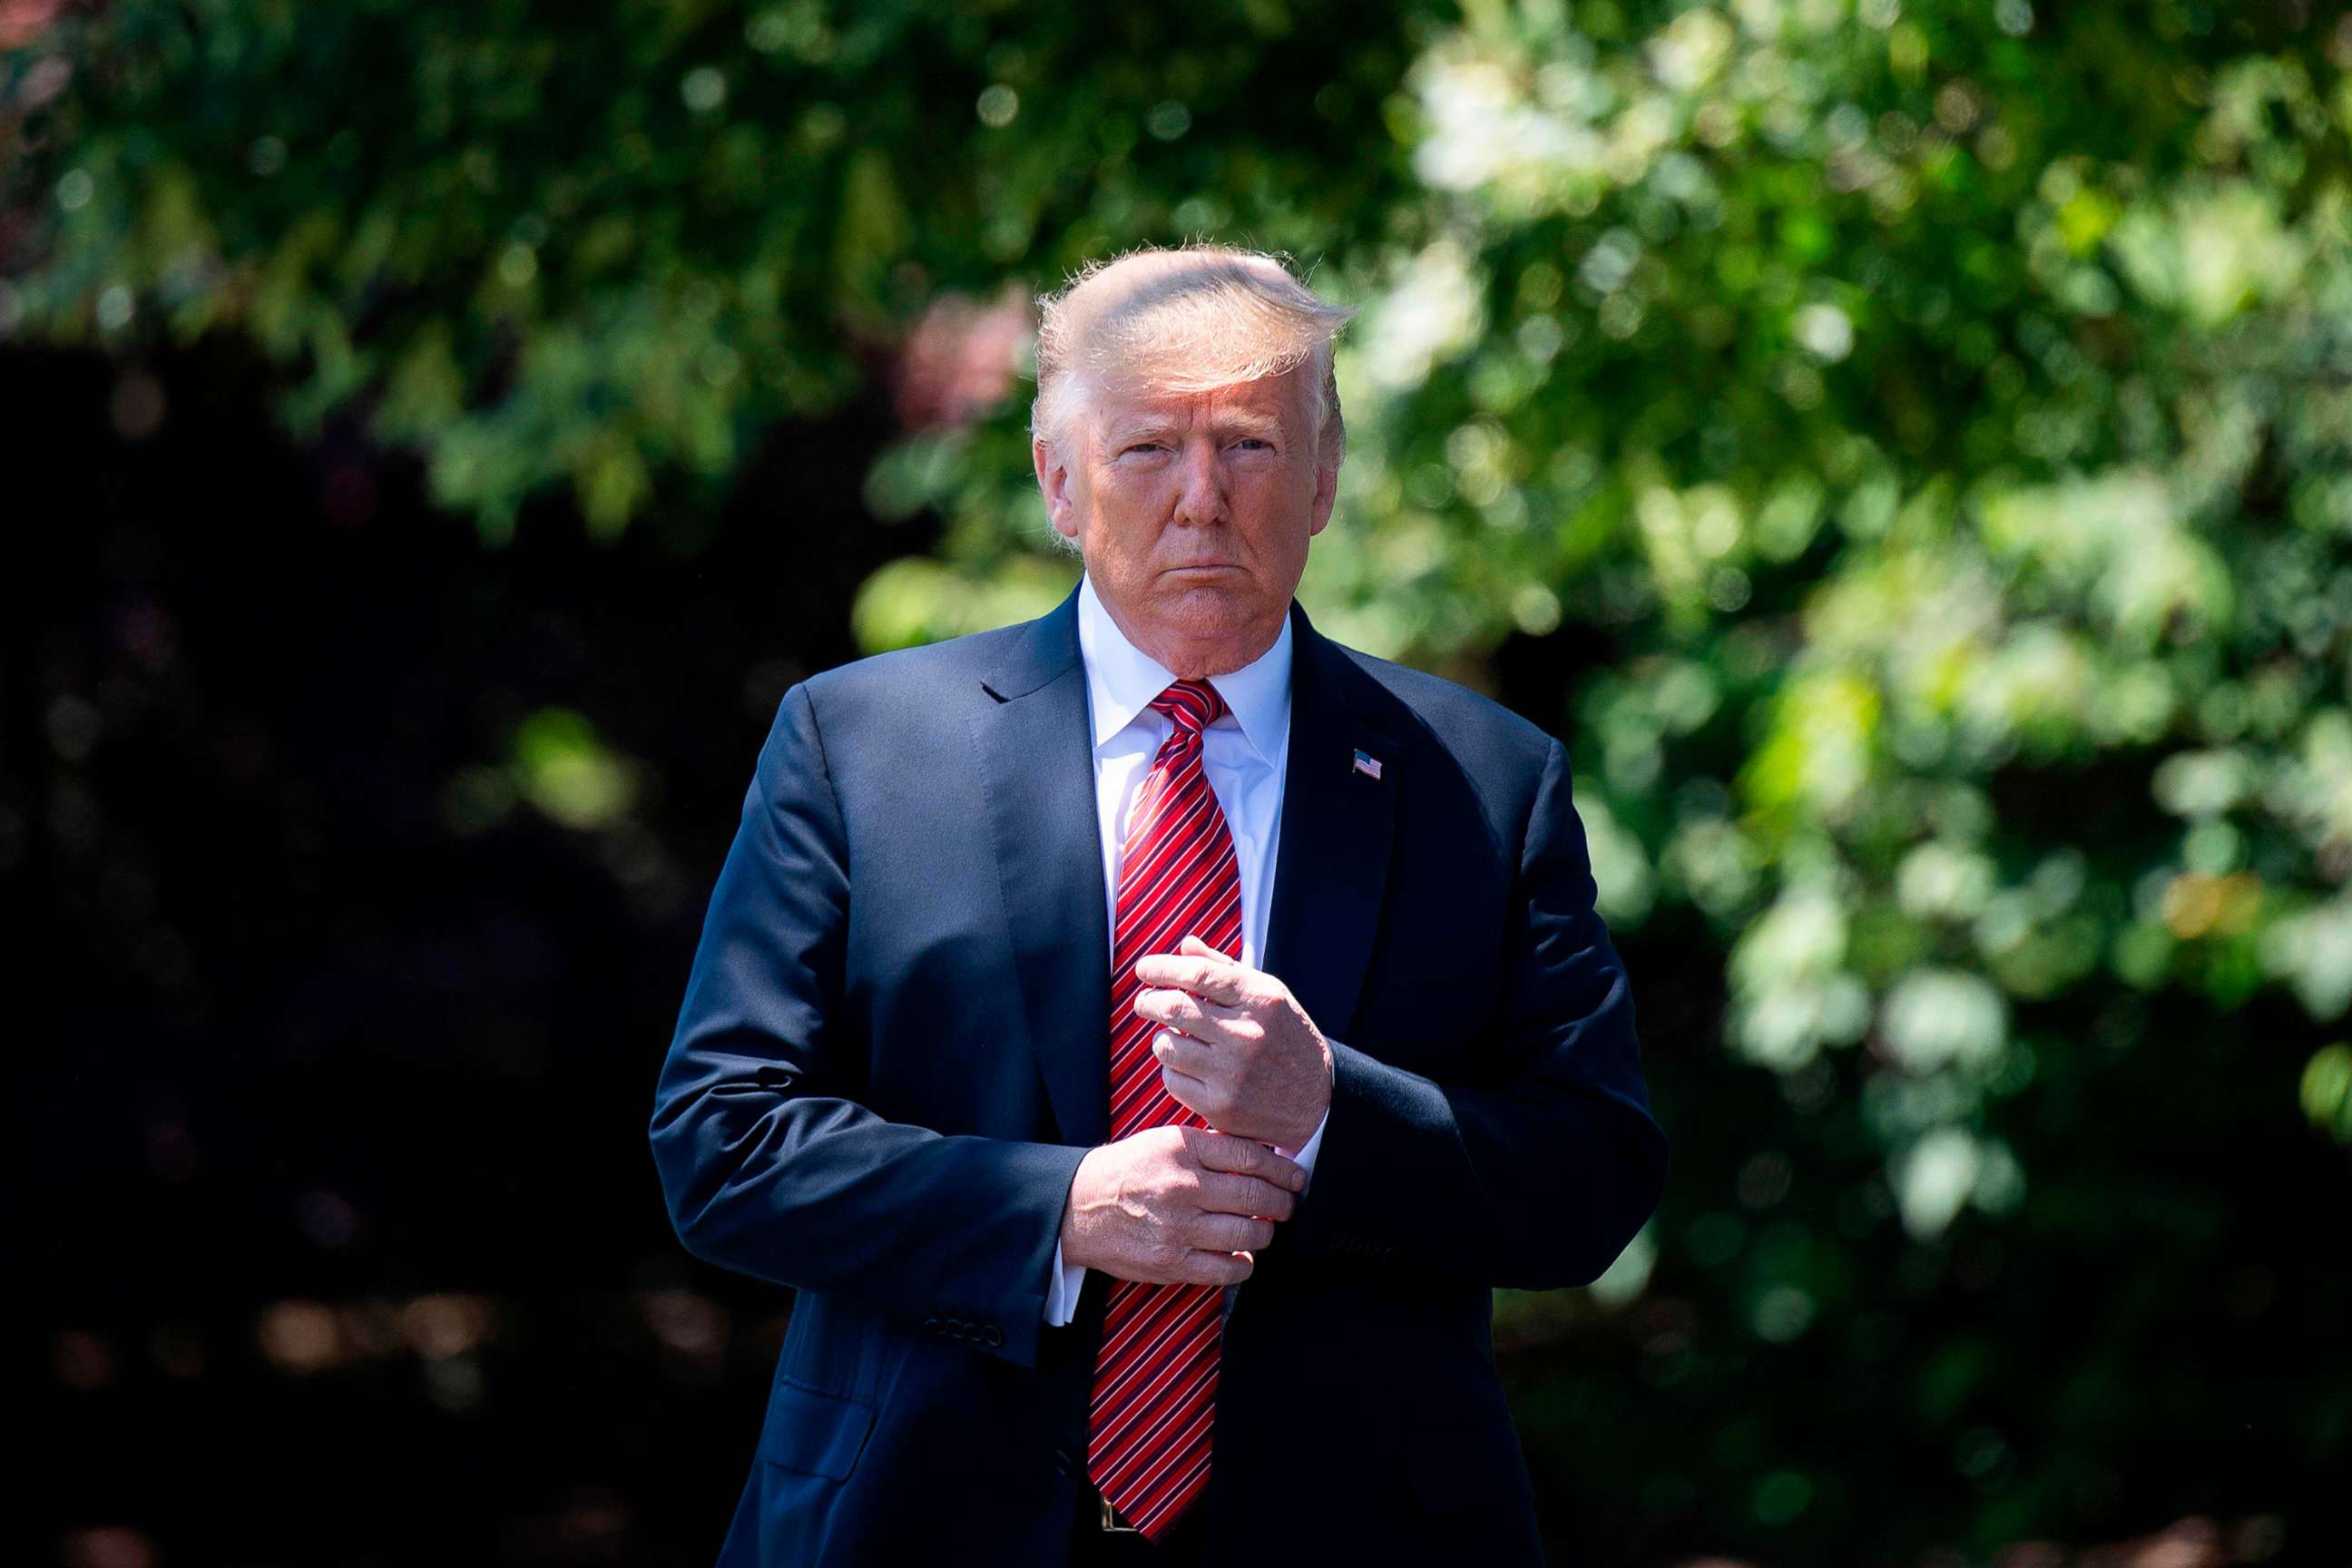 PHOTO: President Donald Trump walks out of the Oval Office to speak with reporters at the White House in Washington, D.C., June 11, 2019.